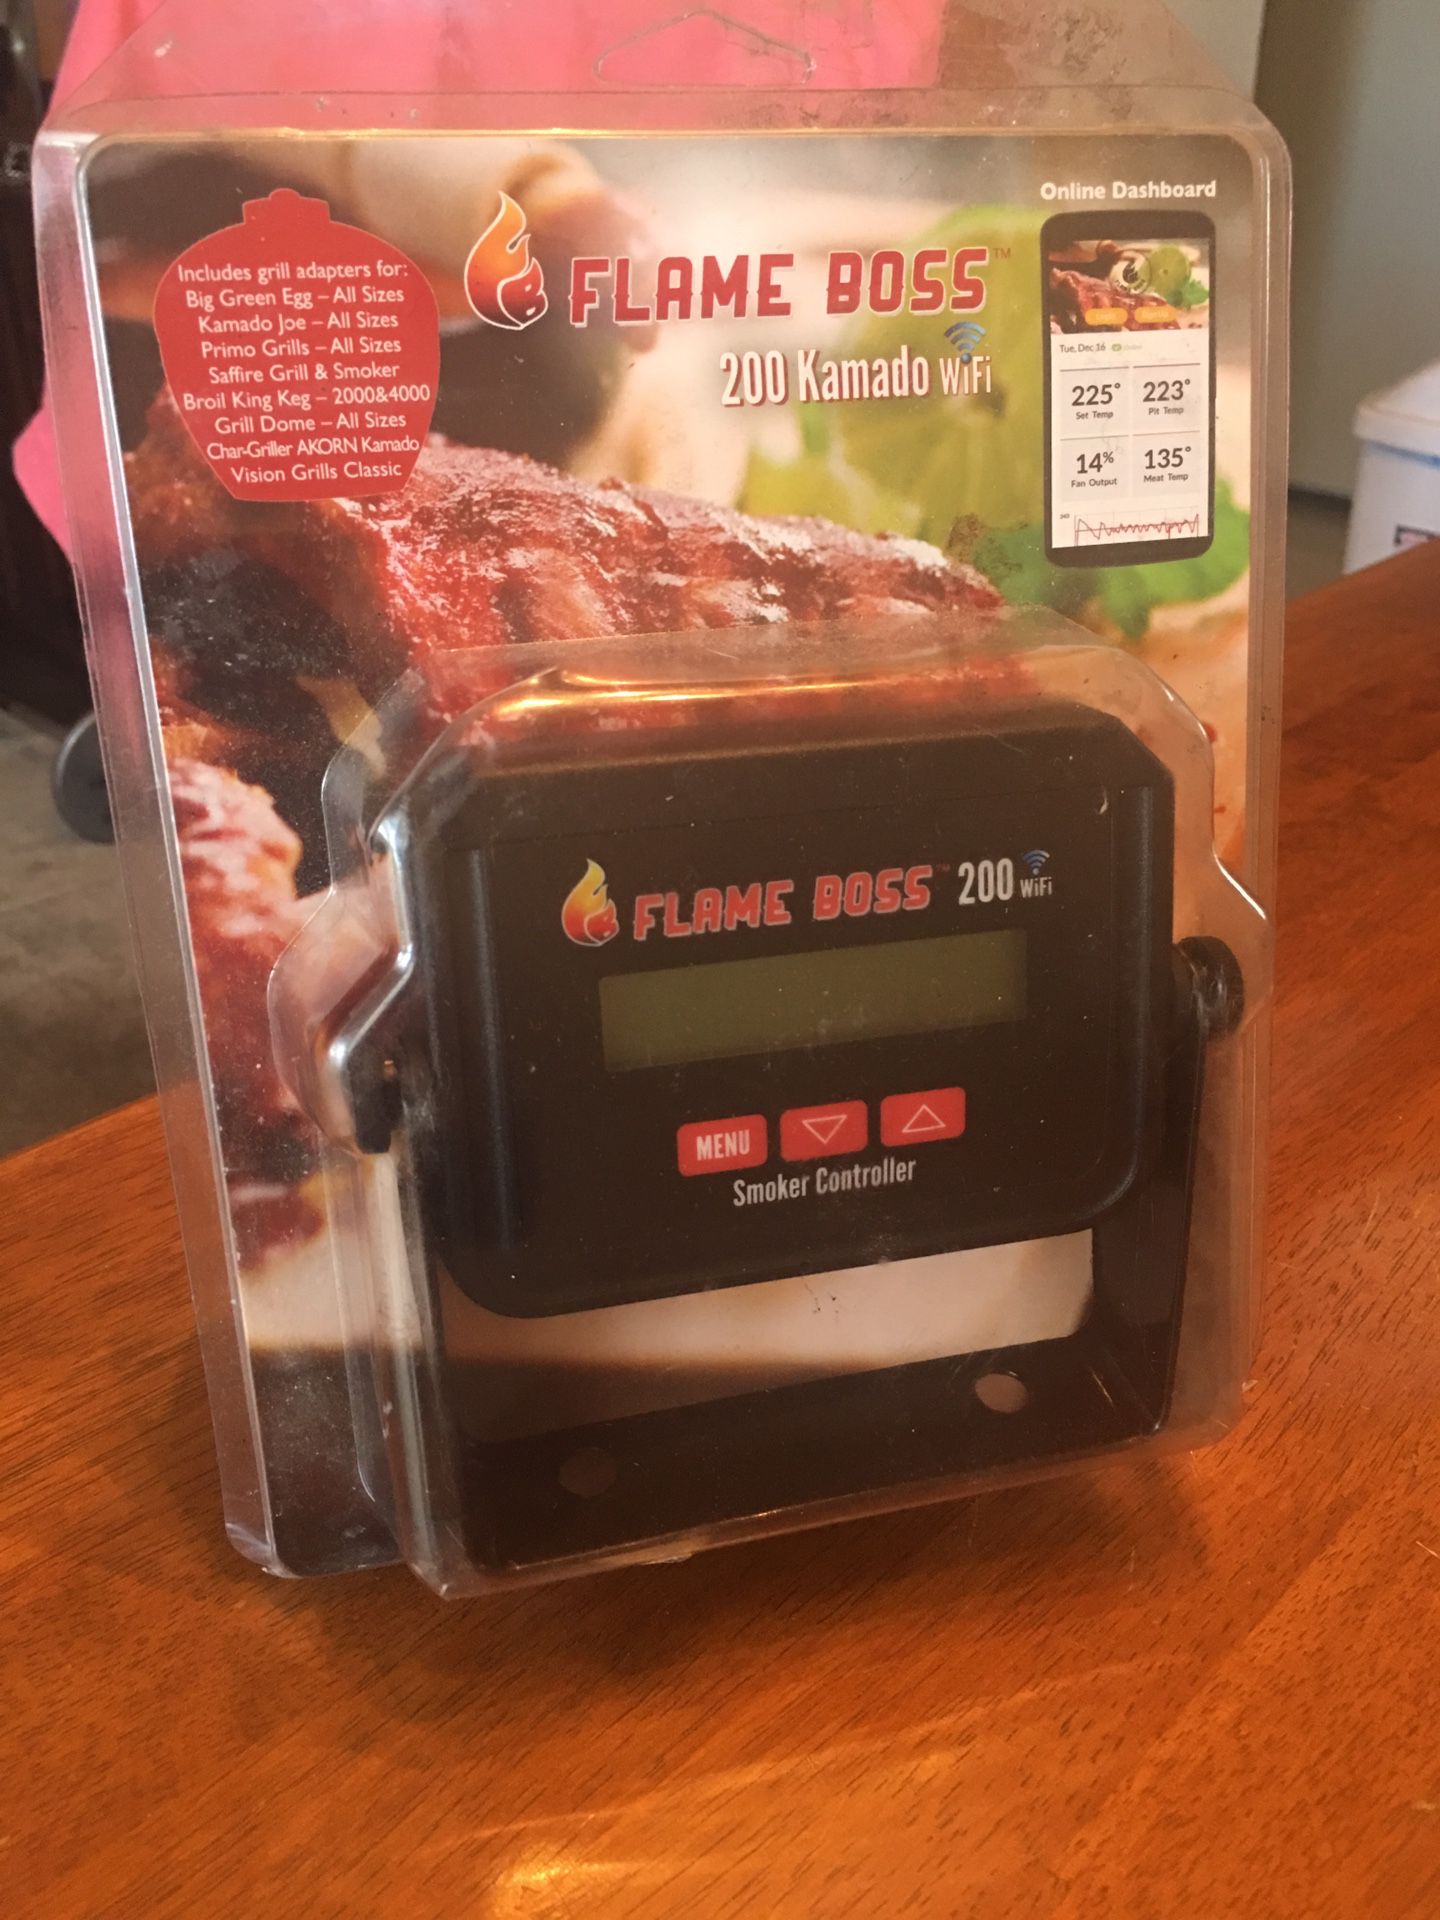 Flame boss 200 IN BOX for in Bakersfield, CA OfferUp